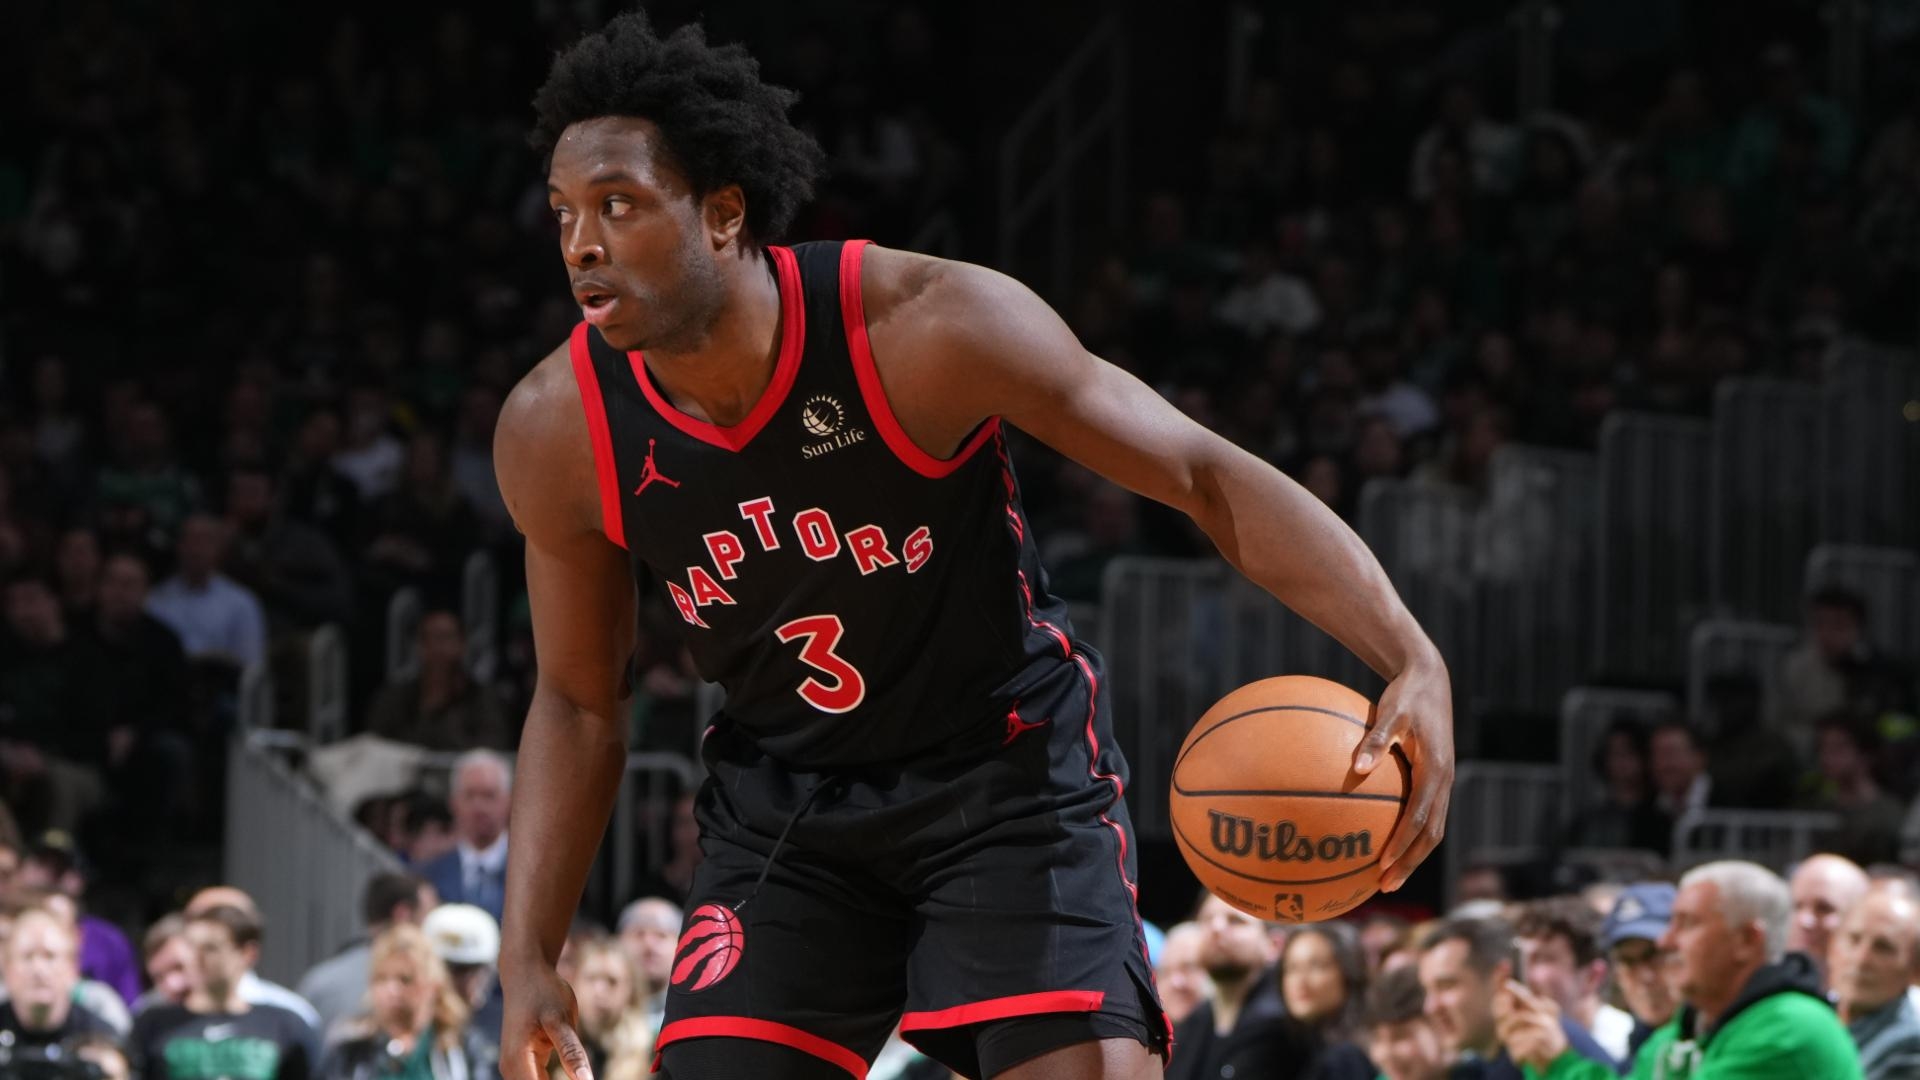 The best of O.G. Anunoby as he's heading to the Knicks - Stream